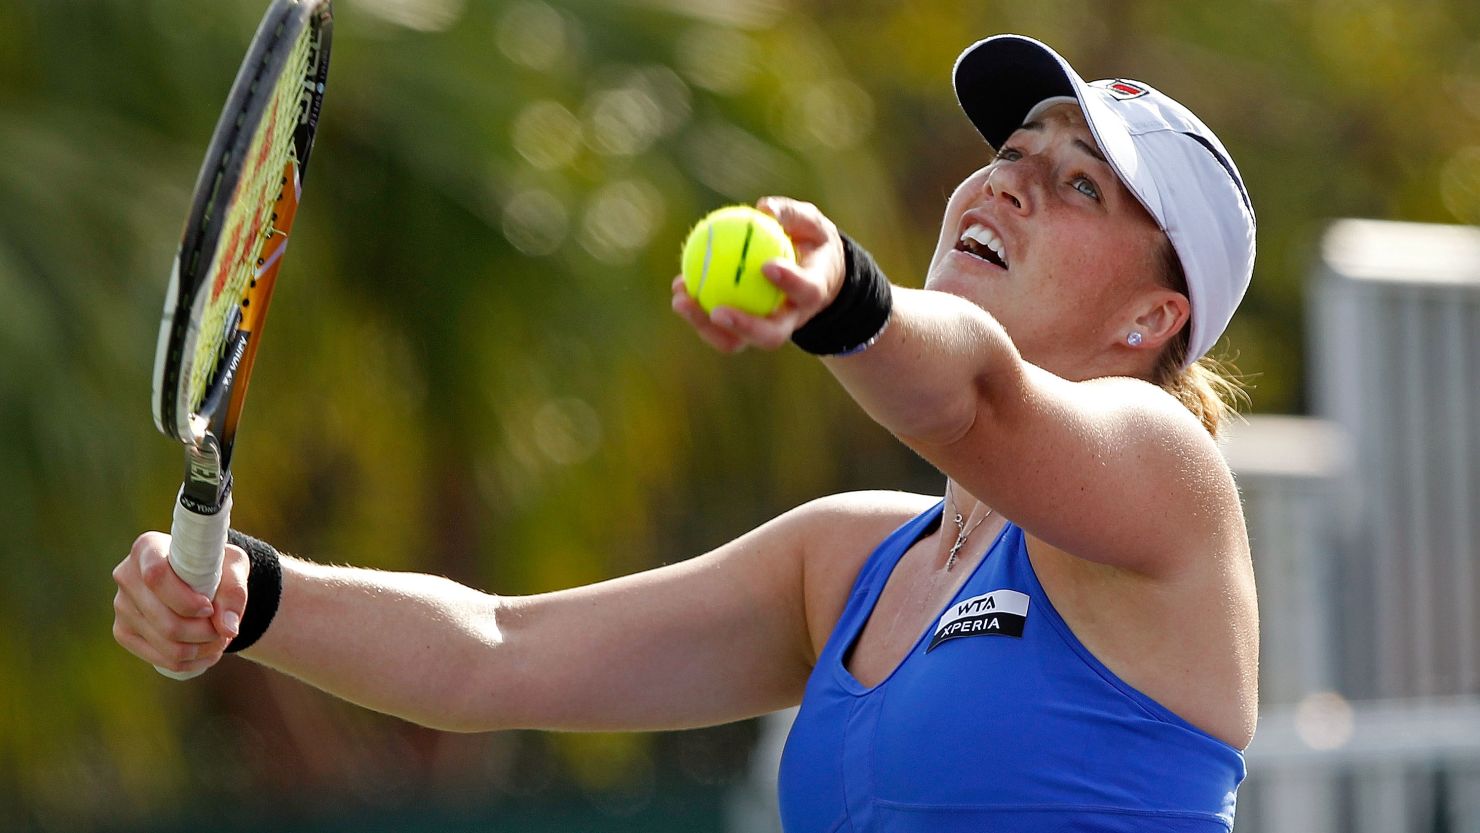 Russia's Alisa Kleybanova has won two WTA Tour titles since turning professional in 2003.